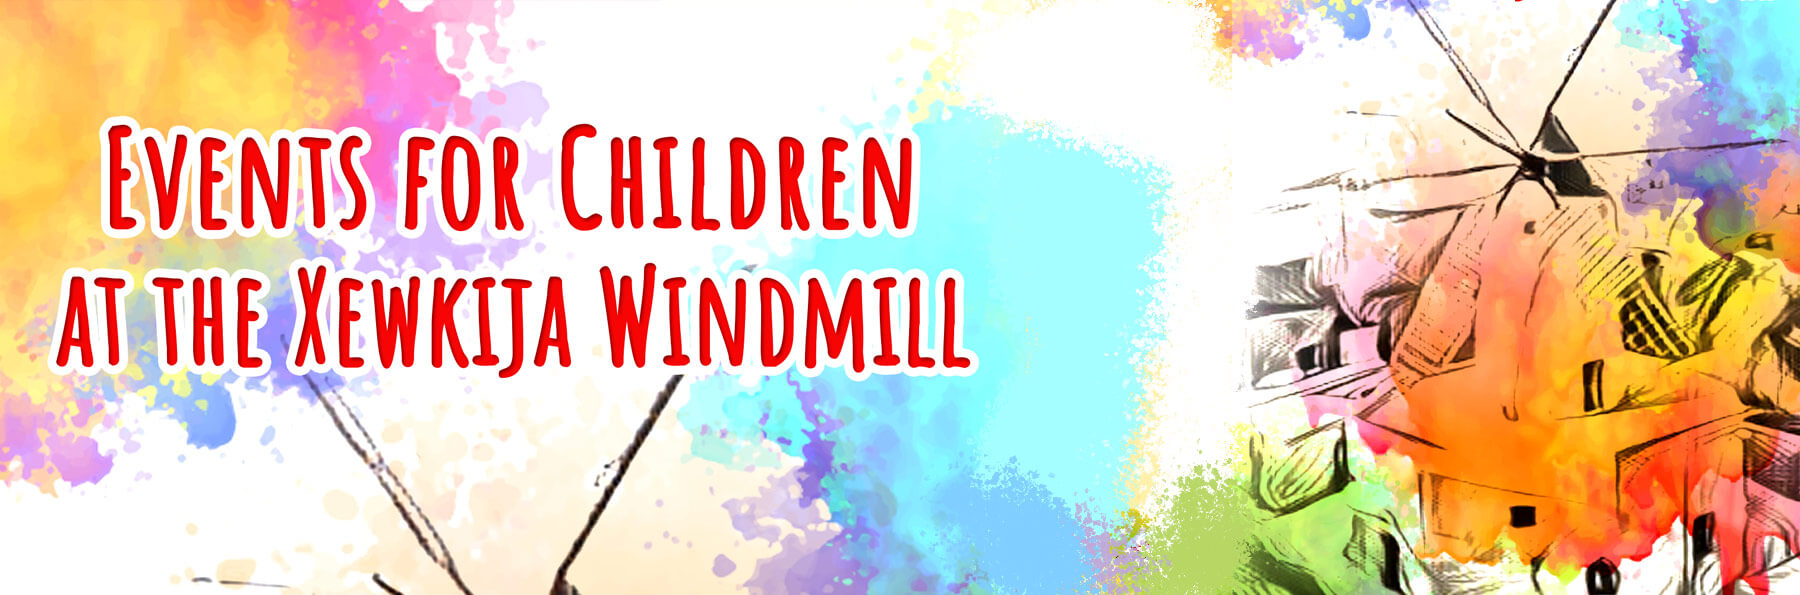 Events for Children at the Xewkija Windmill